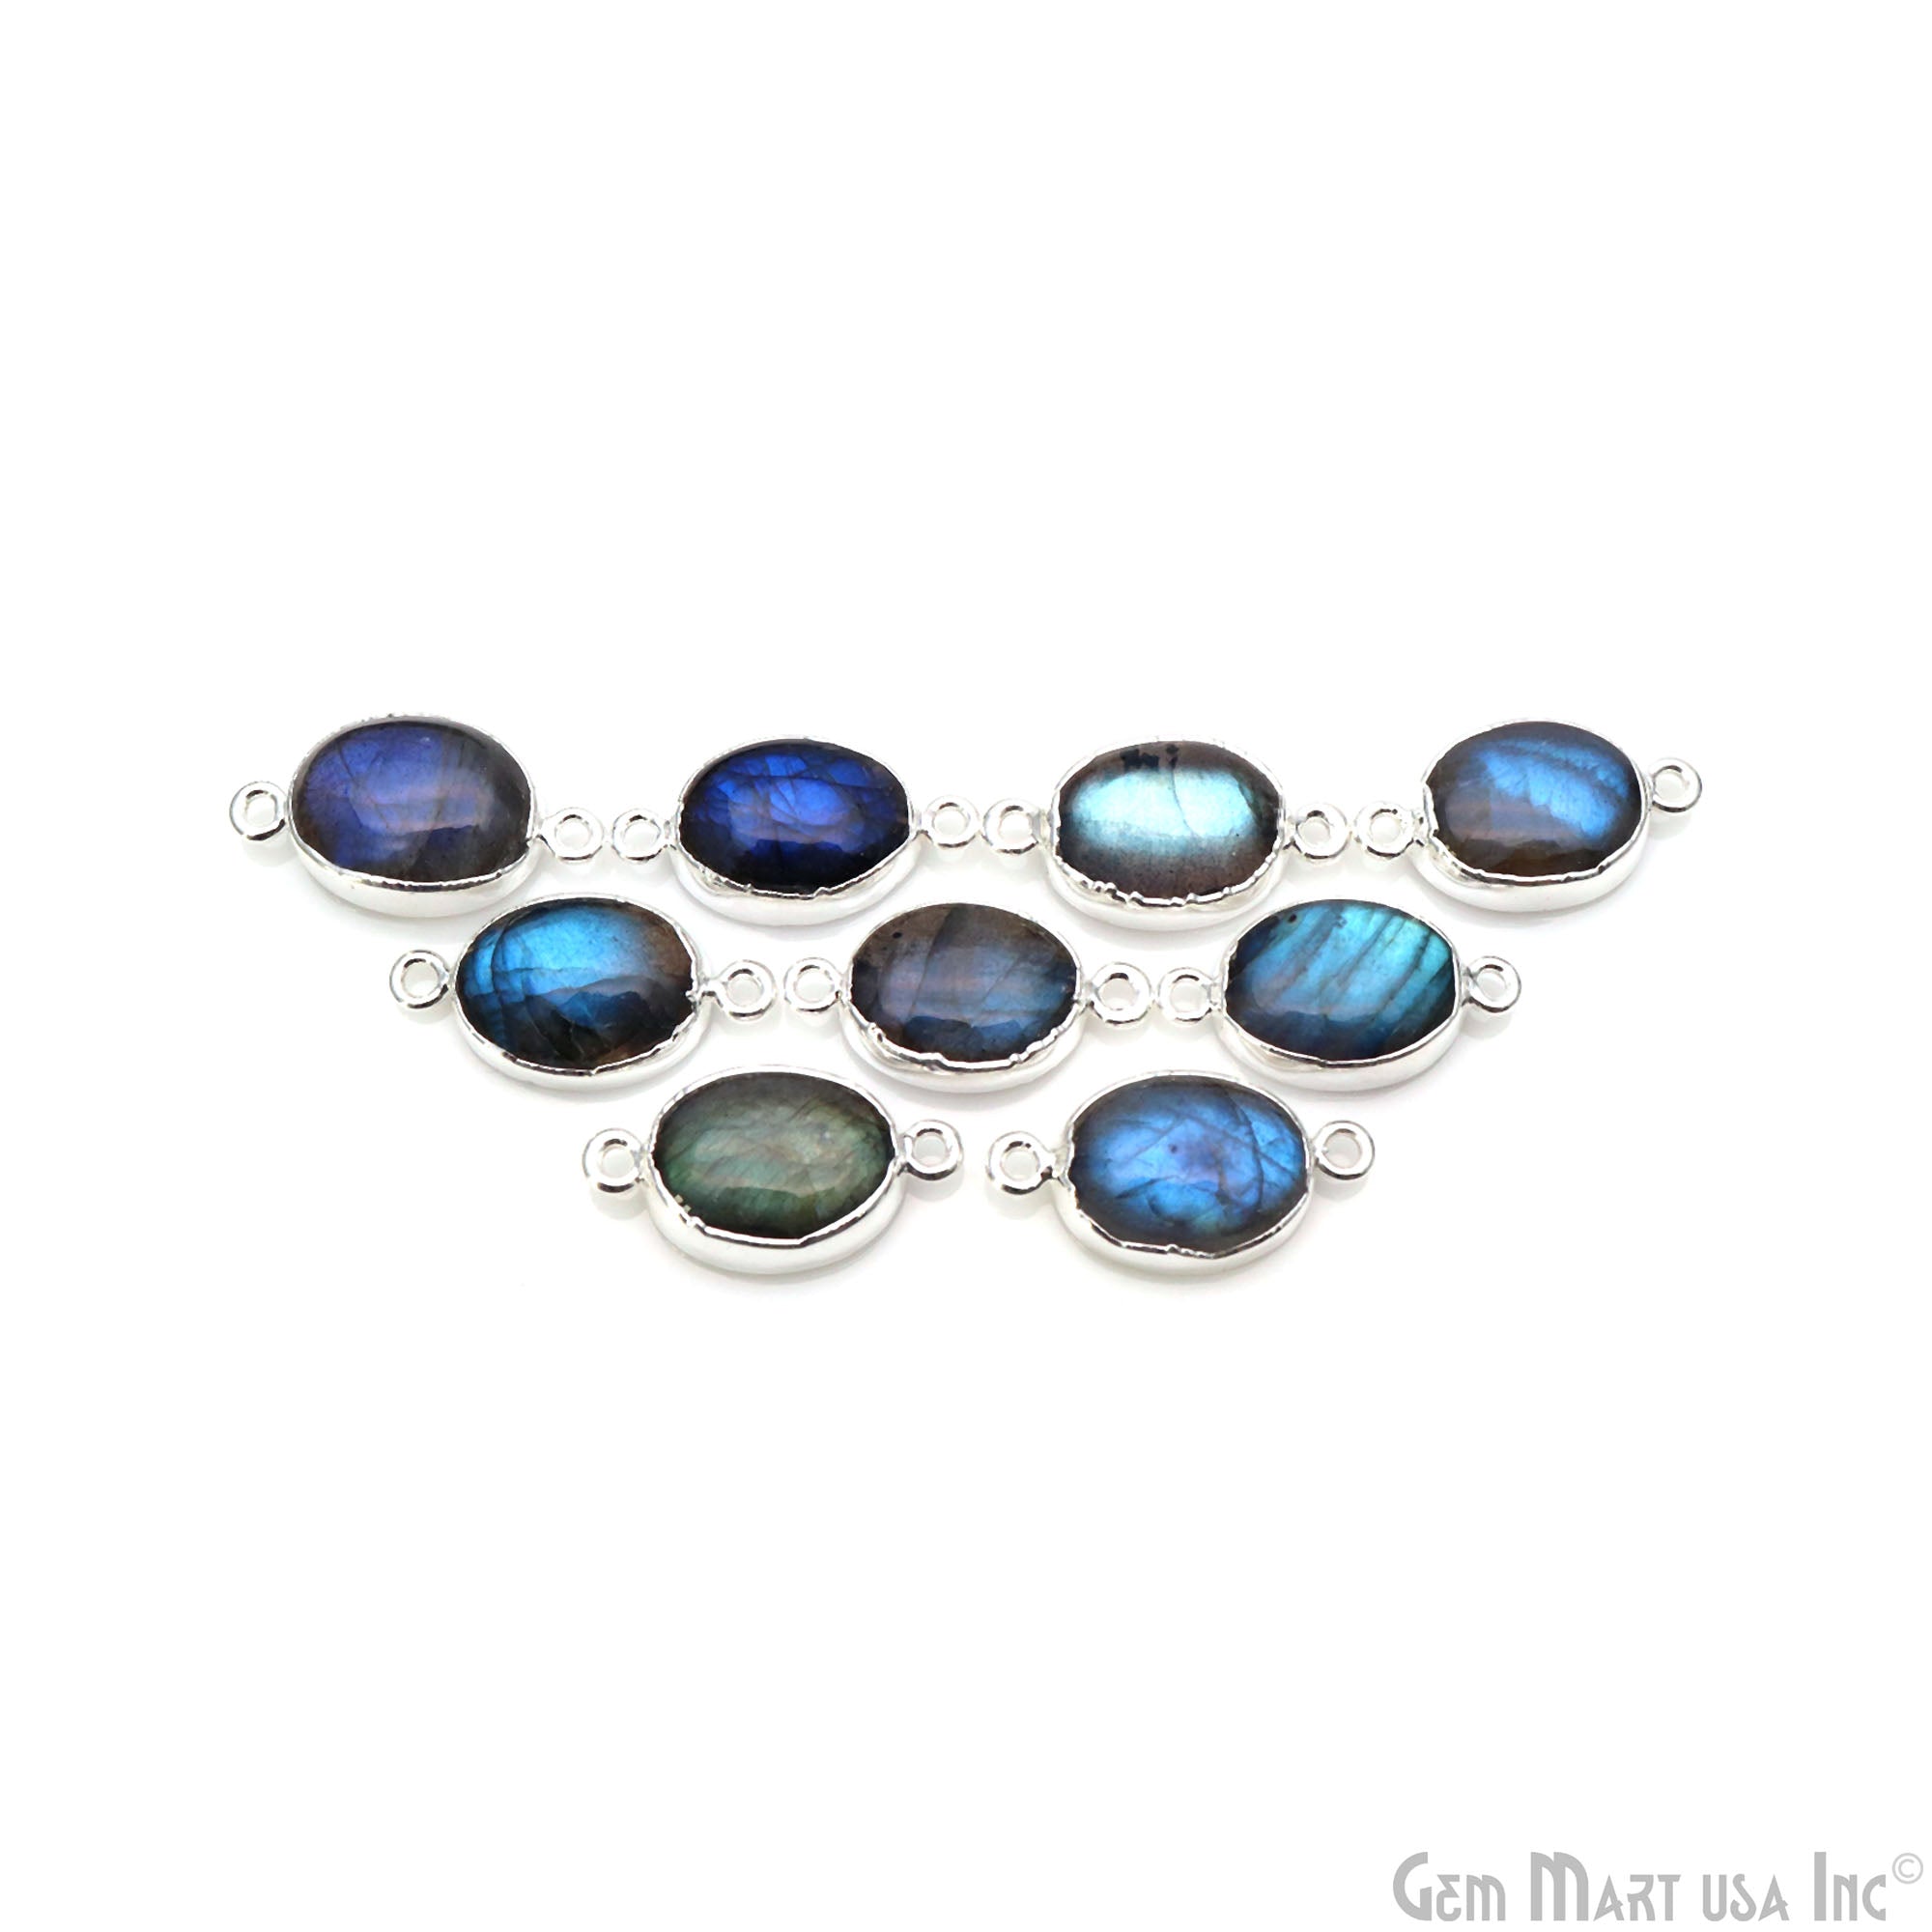 Flashy Labradorite 23x12mm Cabochon Oval Double Bail Silver Electroplated Gemstone Connector